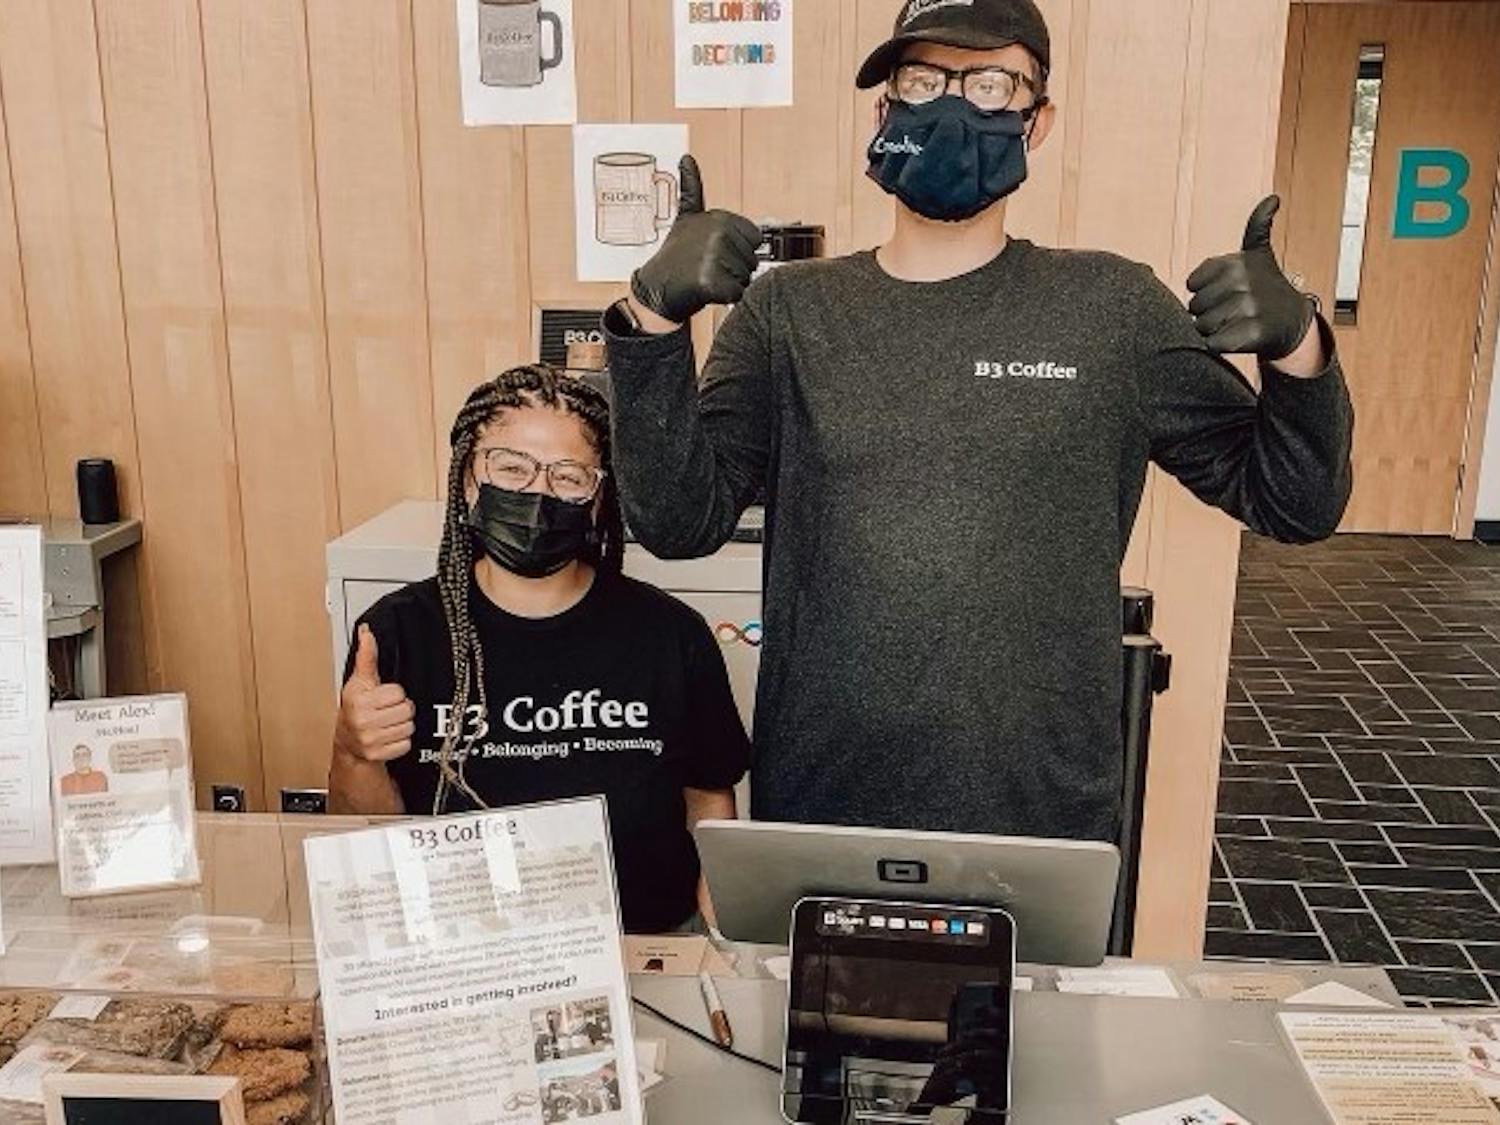 B3 Coffee team members Lauren Winnix and Alex Martel (left to right) work the kiosk on opening day at the Chapel Hill Public Library on Saturday, July 9, 2022. Photo courtesy of B3 co-founder Jacklyn Boheler.